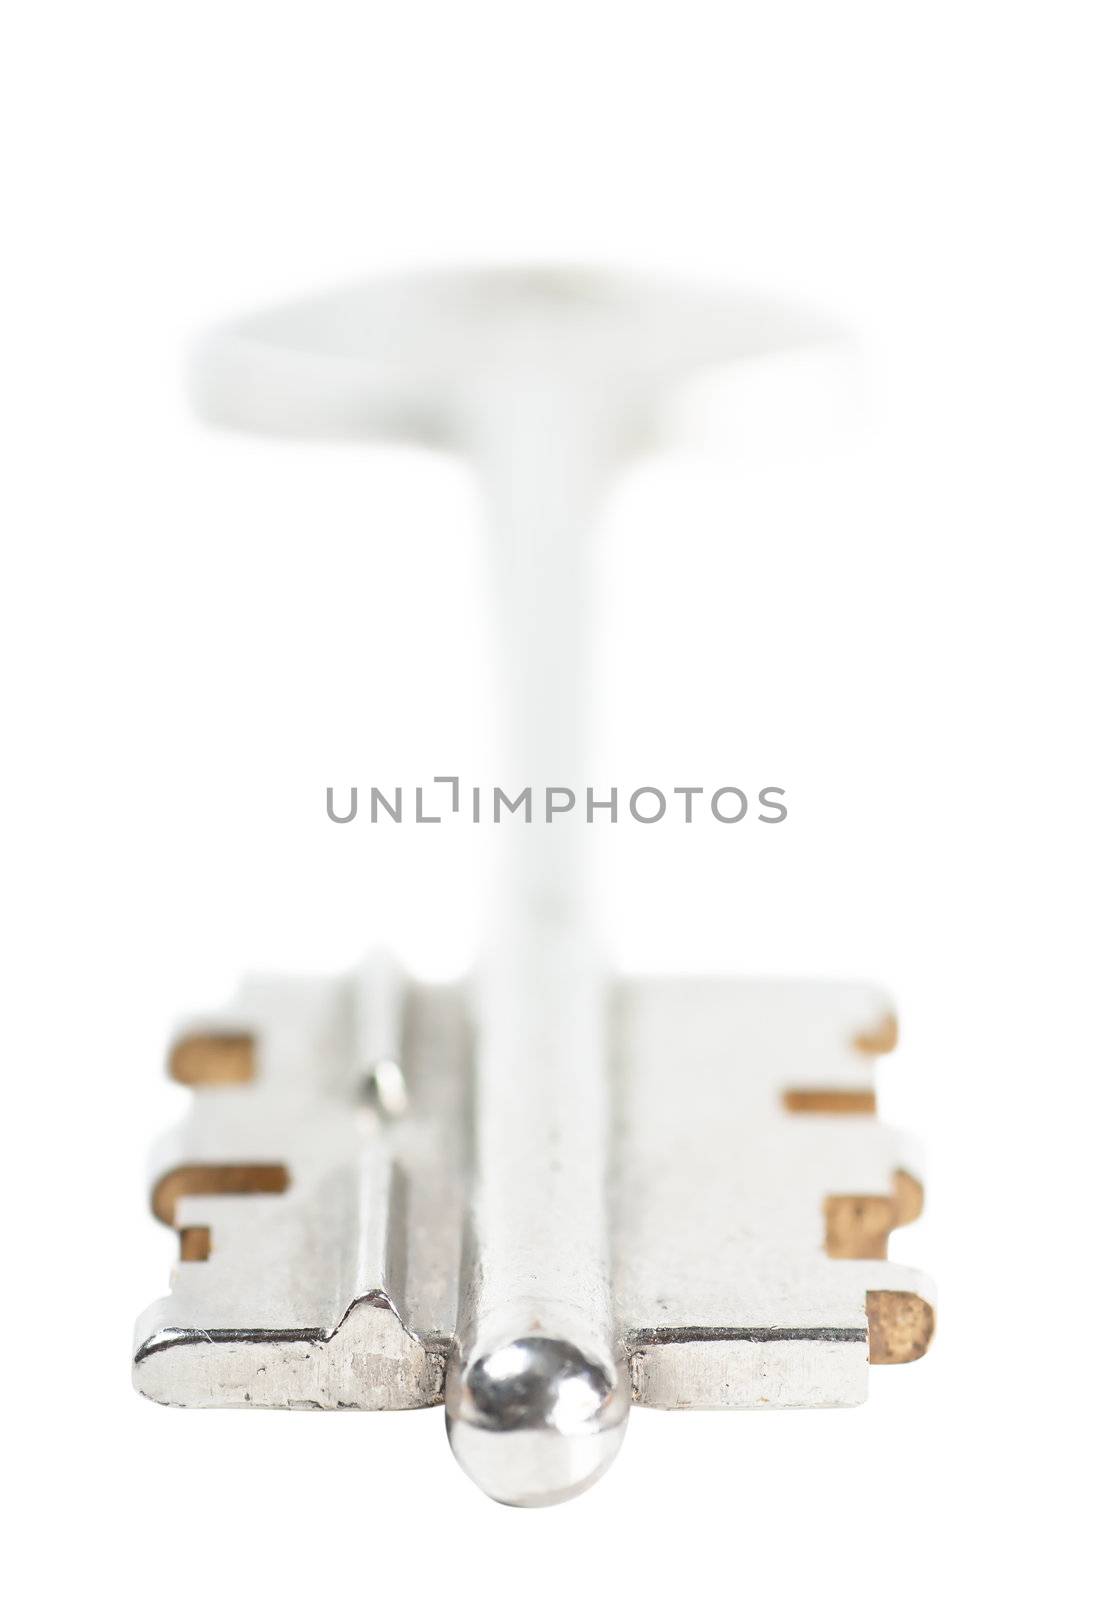 A key isolated over white background